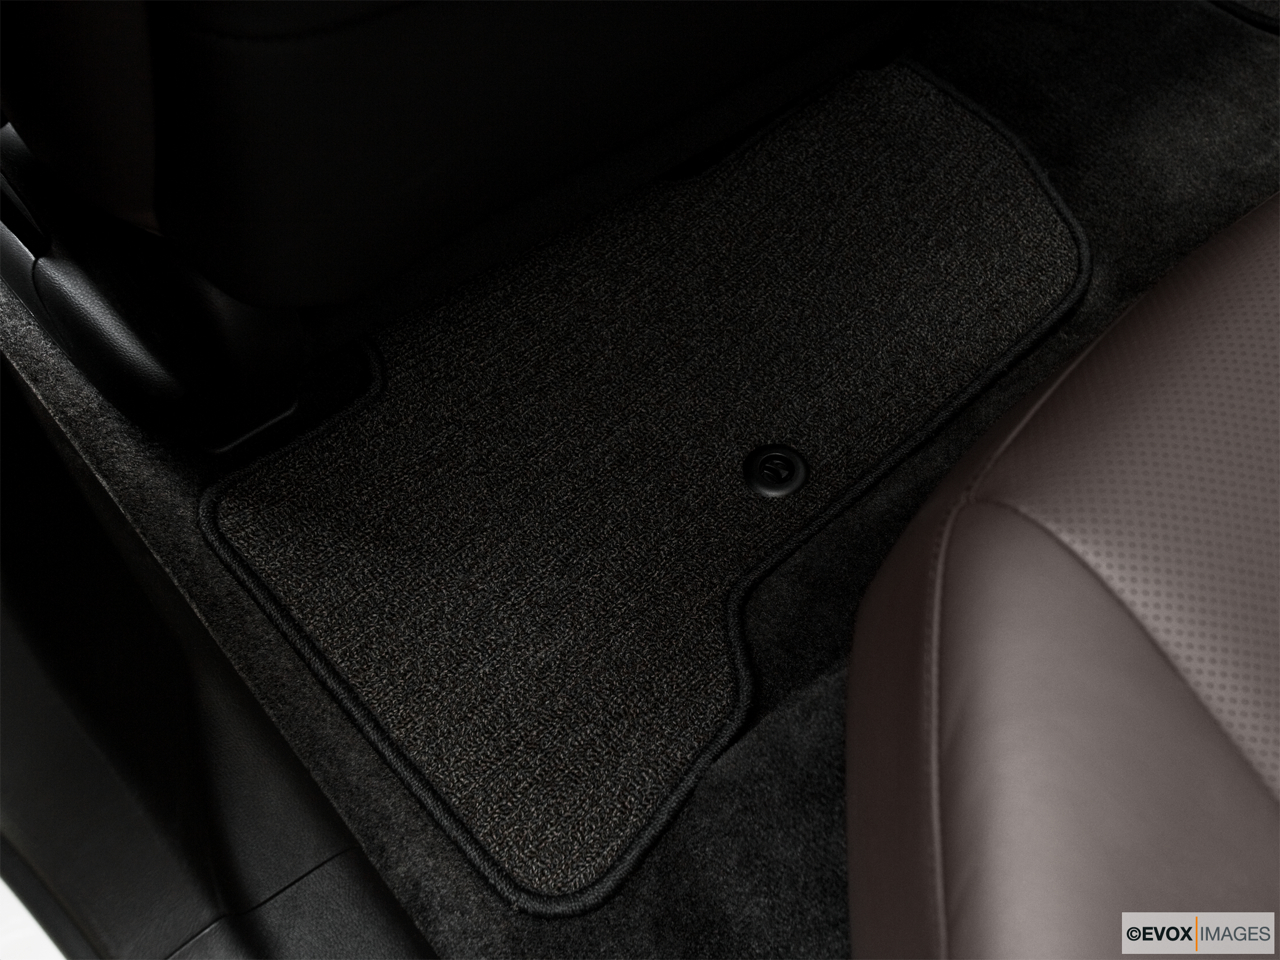 2010 Acura ZDX ZDX Technology Rear driver's side floor mat. Mid-seat level from outside looking in. 